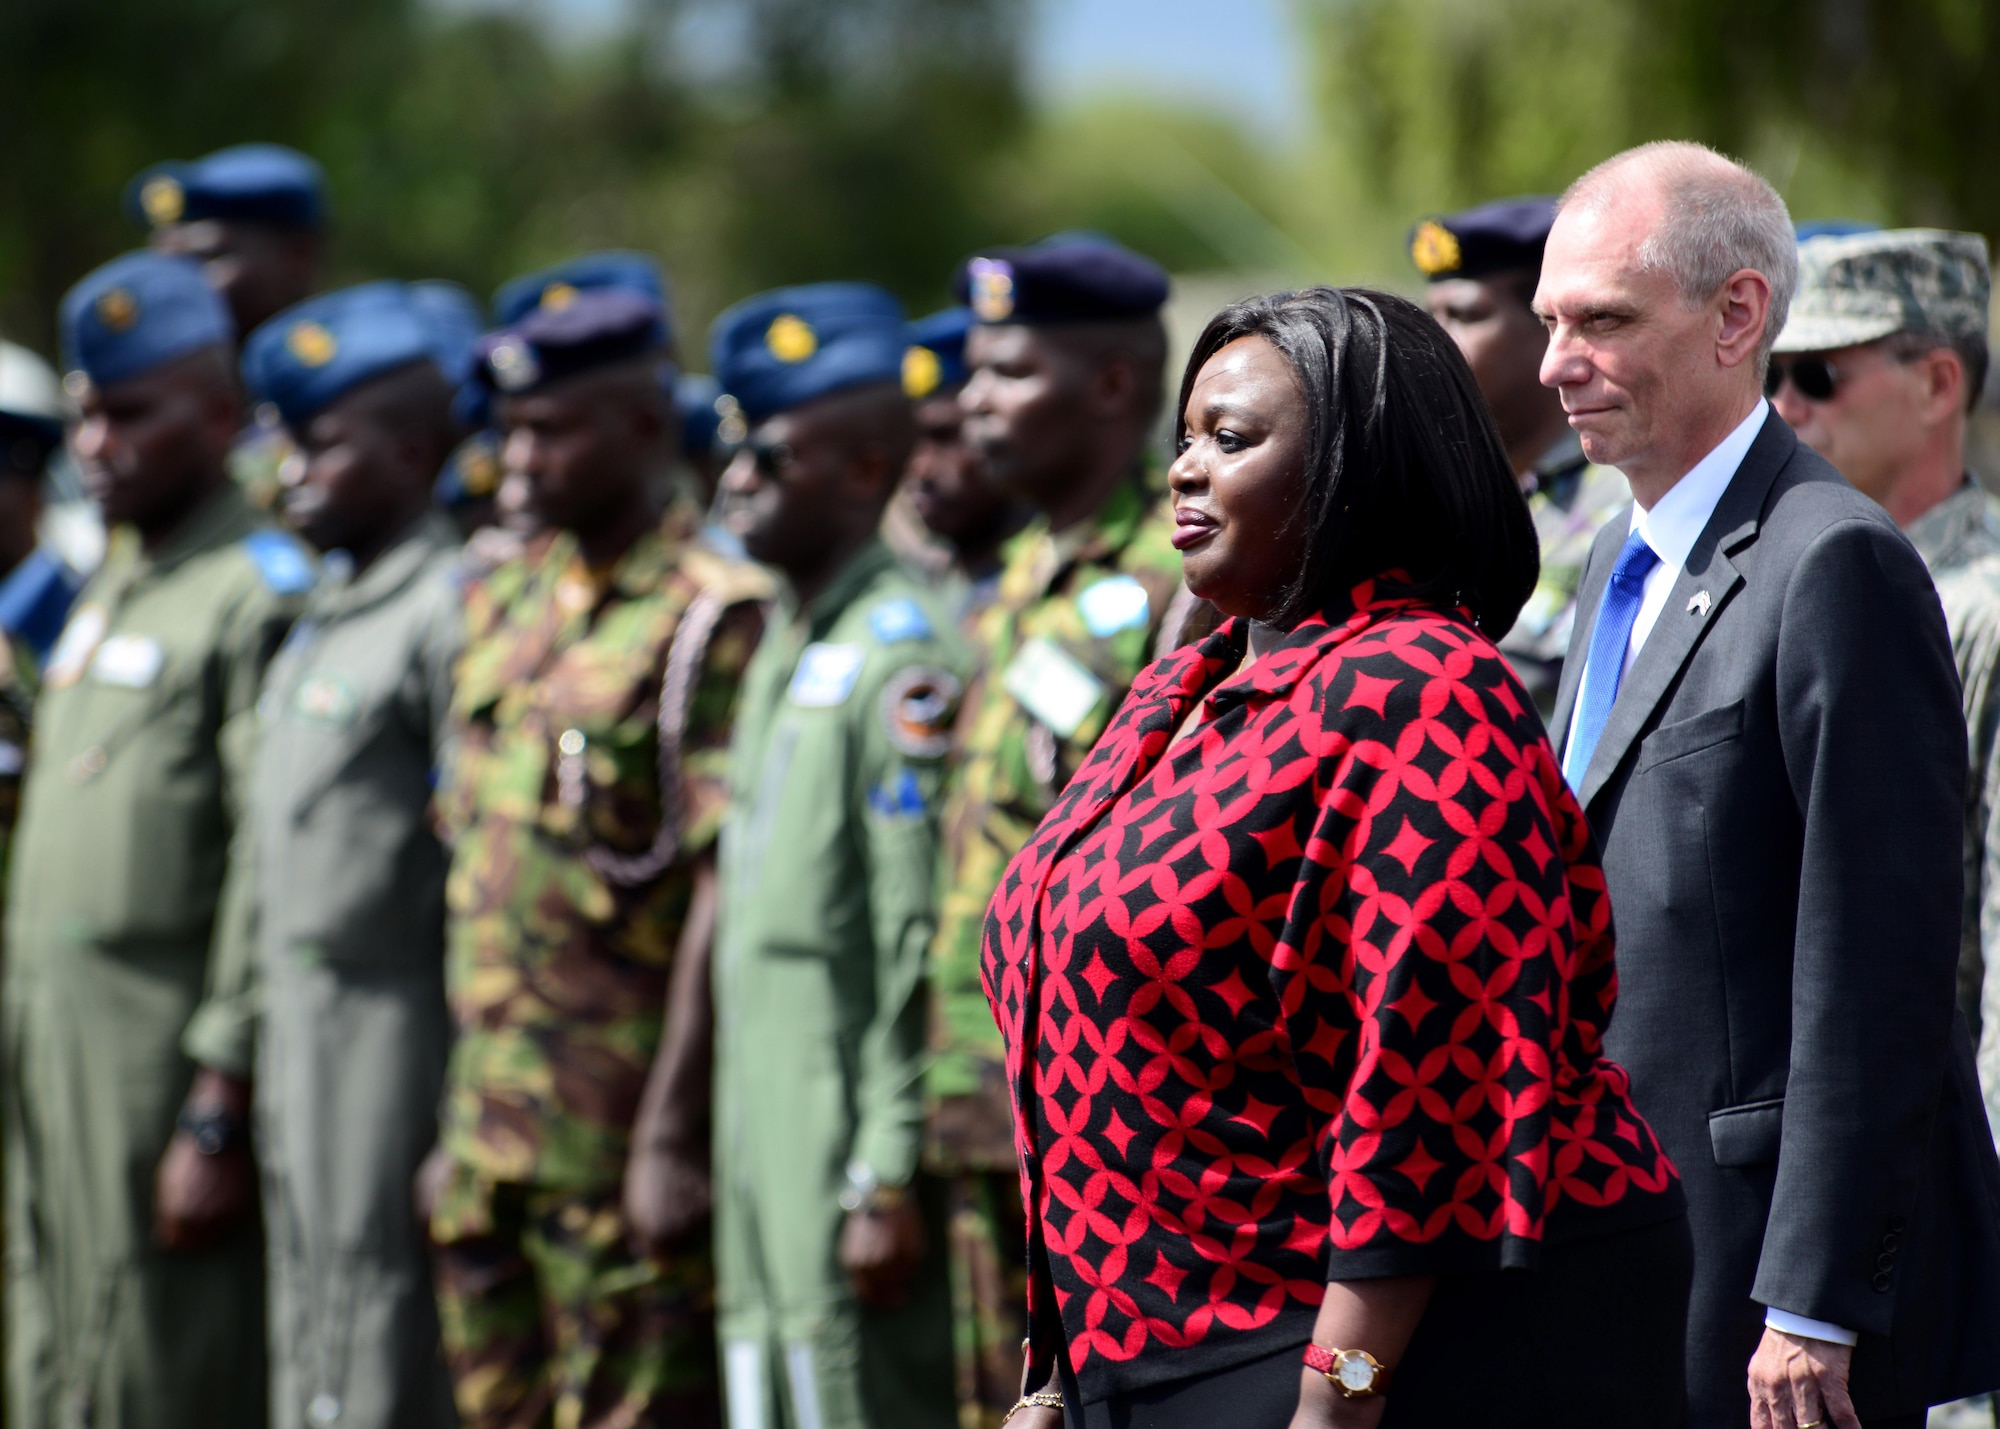 (From left) Raychelle Omamo, Kenyan Cabinet Secretary for Defense and Robert Godec, U.S. Ambassador to Kenya, welcome African Partnership Flight participants during the opening ceremony at Laikipia Air Base, Kenya, June 21, 2016. More than 50 U.S. Air Force Airmen participated in the first African Partnership Flight in Kenya. The APF is designed for U.S. and African partner nations to work together in a learning environment to help build expertise and professional knowledge and skills. (U.S. Air Force photo by Tech. Sgt. Evelyn Chavez/Released)